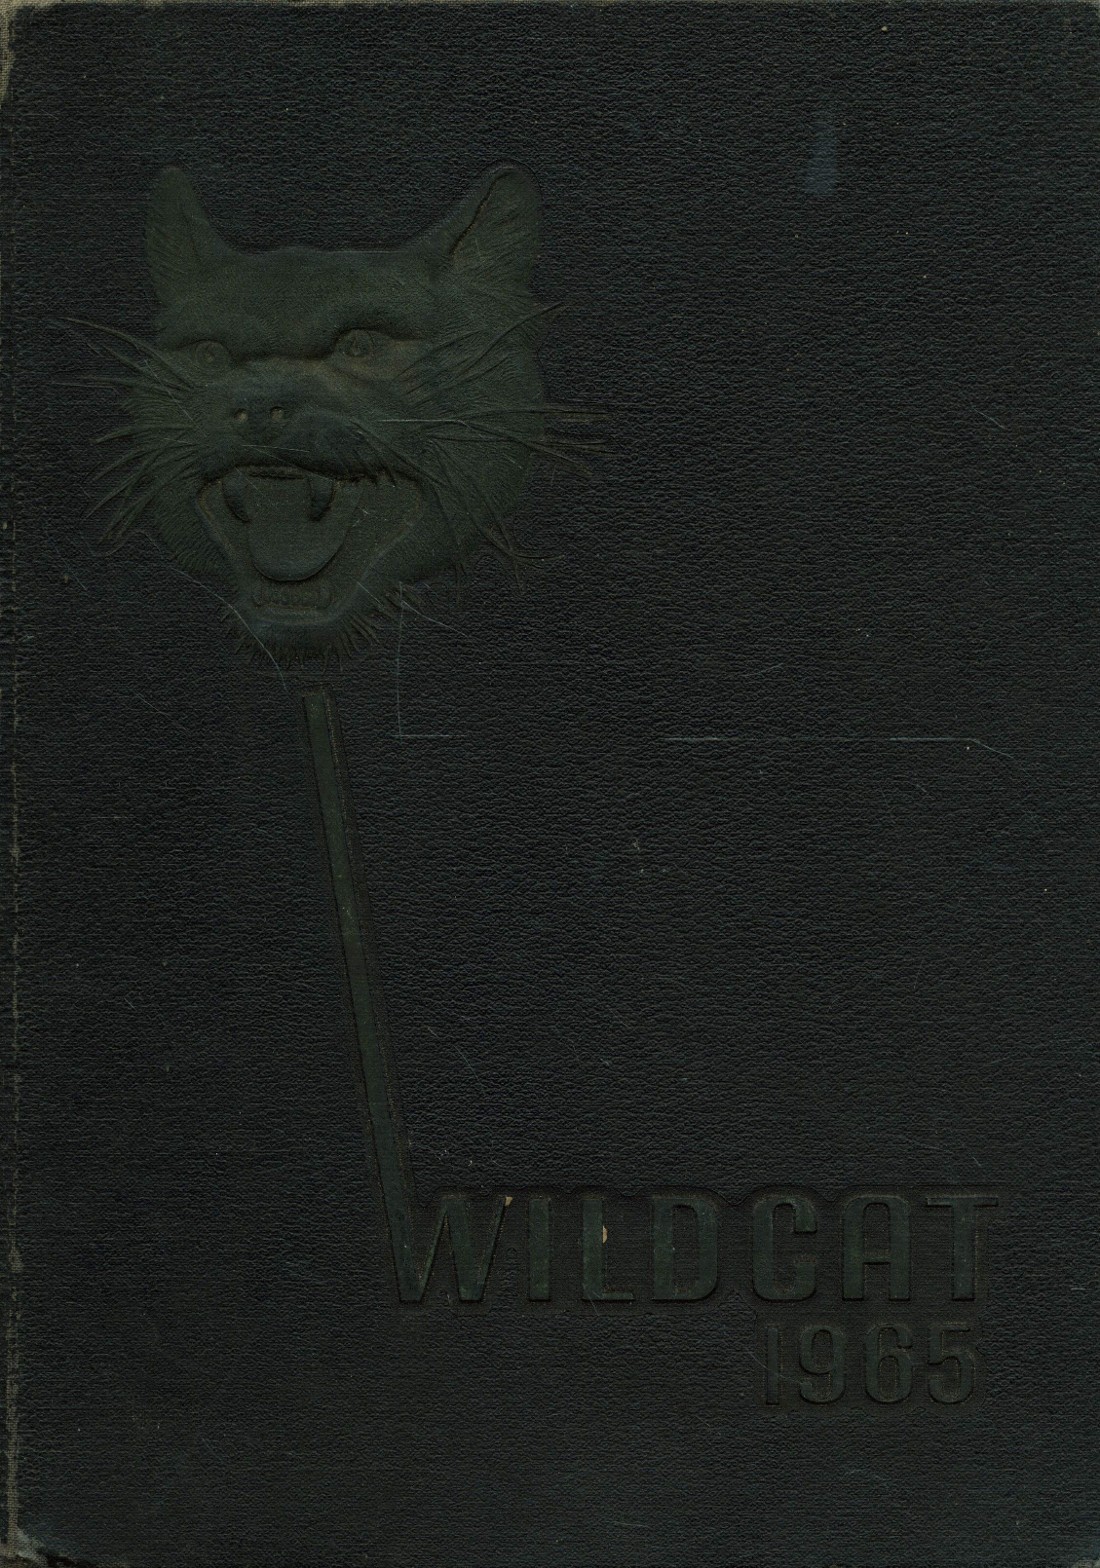 1965 yearbook from Hixson High School from Hixson, Tennessee